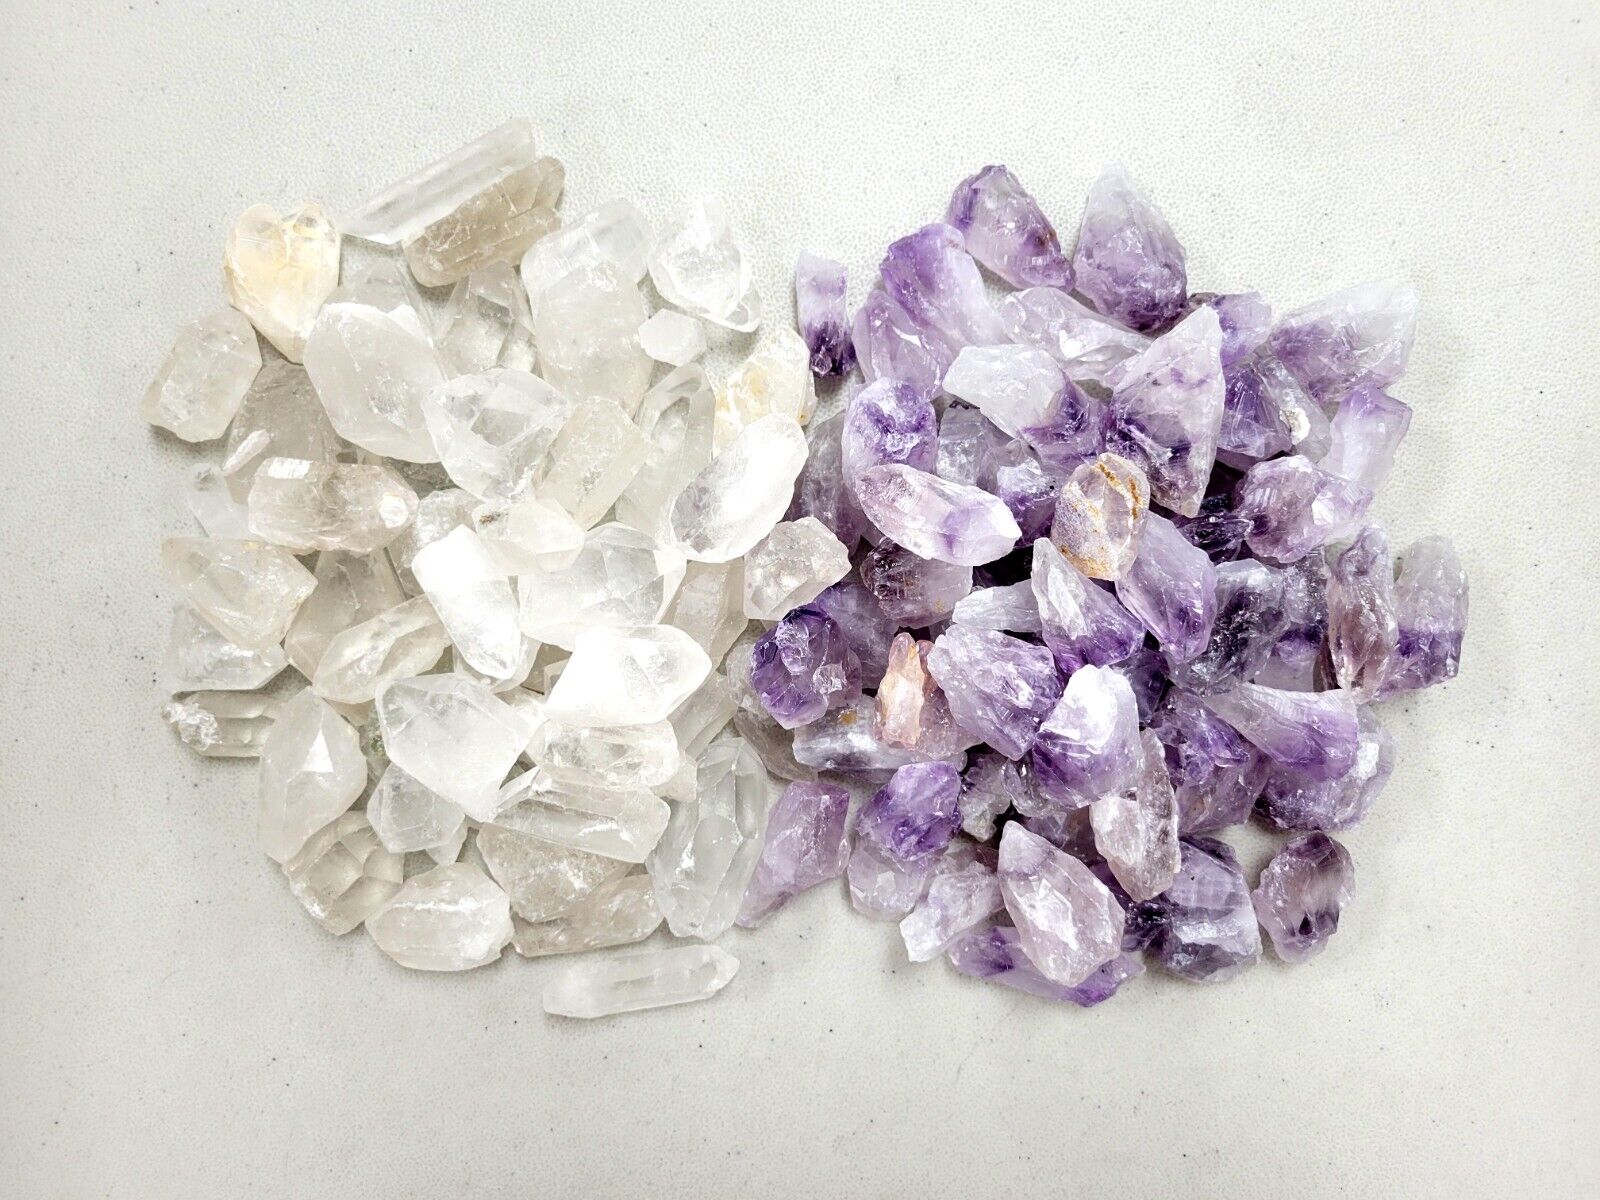 Amethyst & Quartz Crystal Points Combo Bulk Wholesale for Wire Wrapping Healing